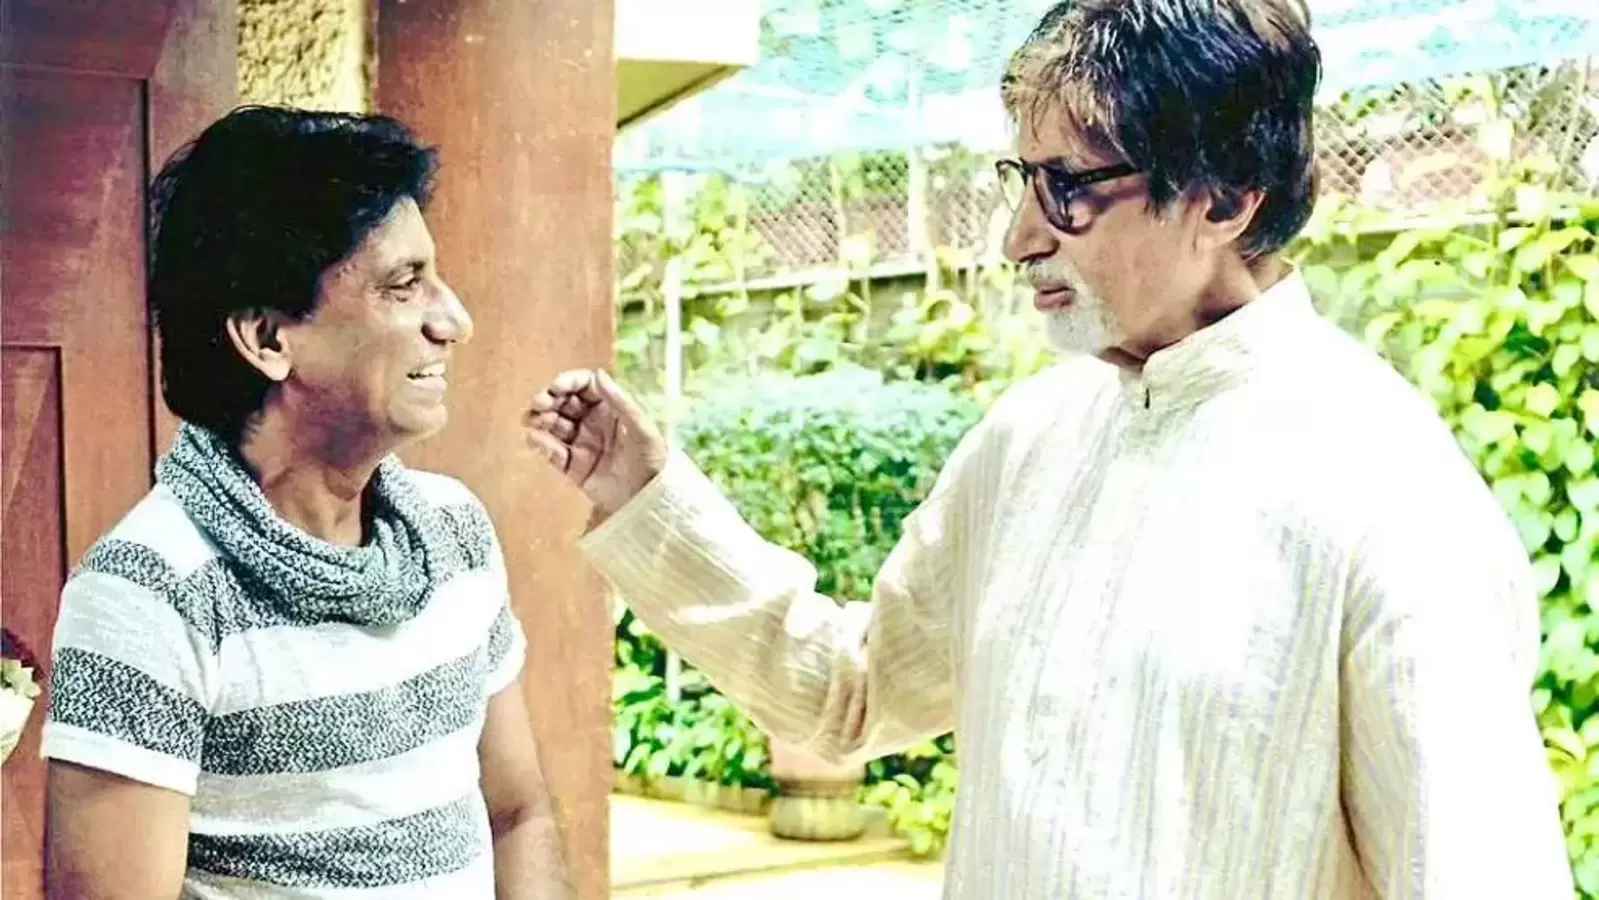 ‘Amitabh Bachchan enquired about dad’s health every single day when he was hospitalised’, says Raju Srivastav’s daughter